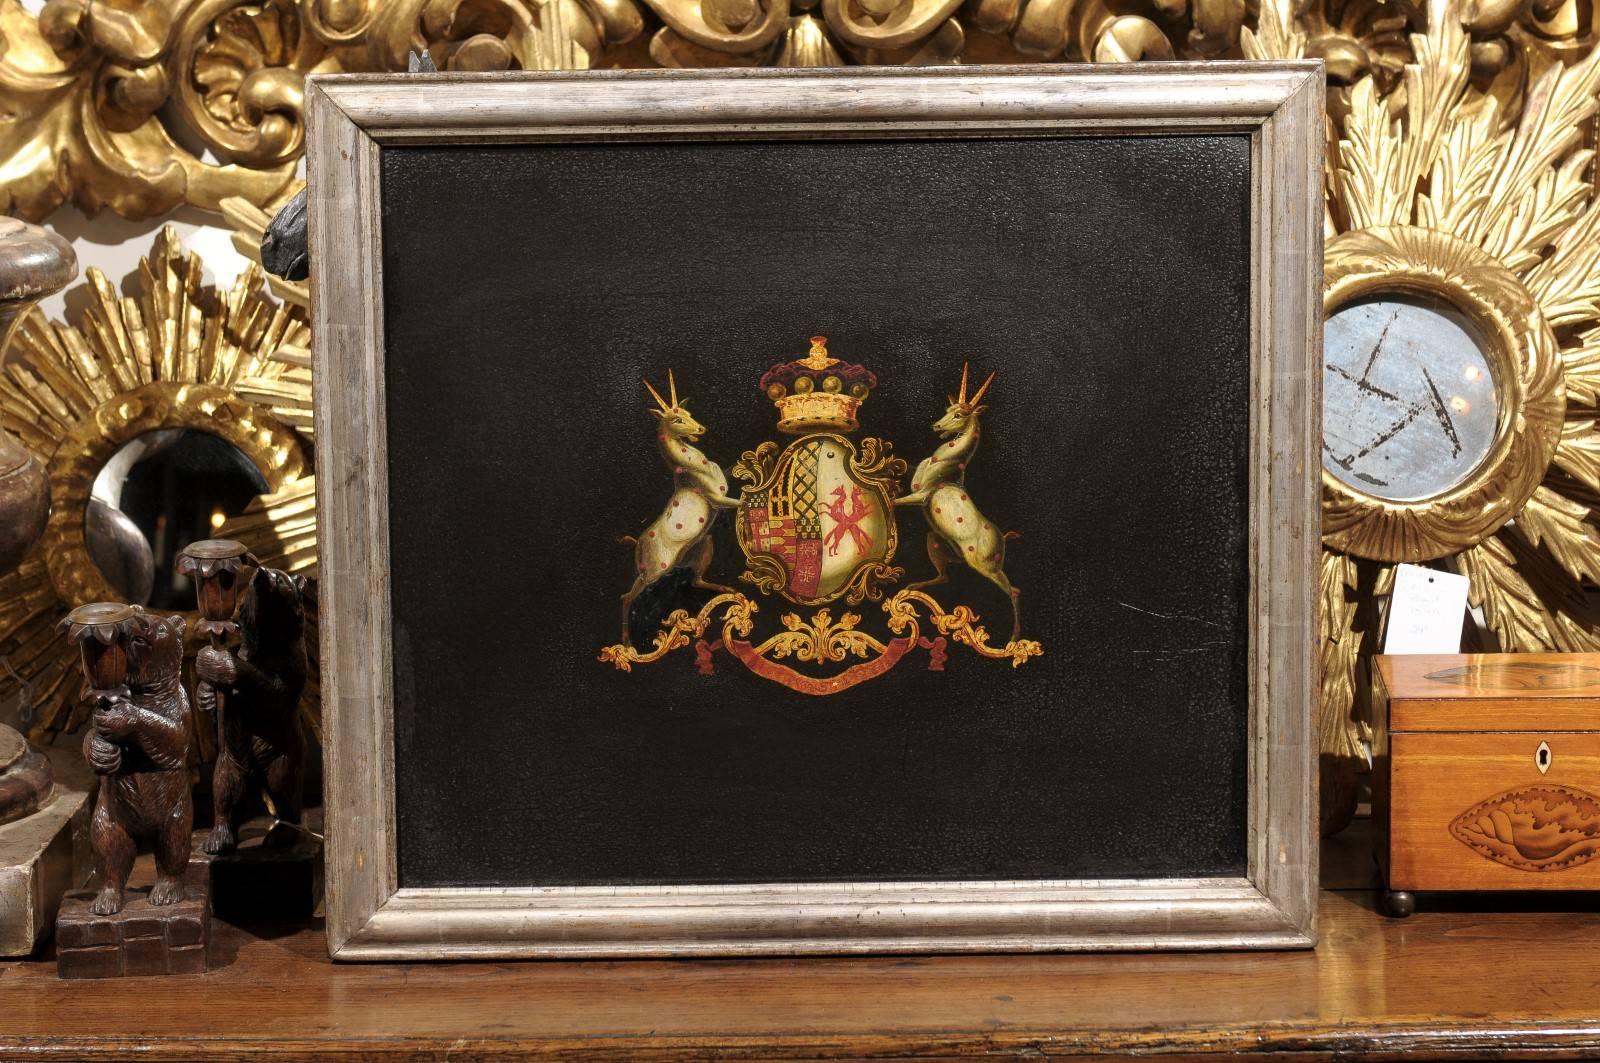 A turn of the century (19th to 20th) English coat of arms painting with silver leaf frame. This English painting from circa 1900 features two antelopes with white coat and red spots flanking a central shield with heraldic decor, topped with a crown.